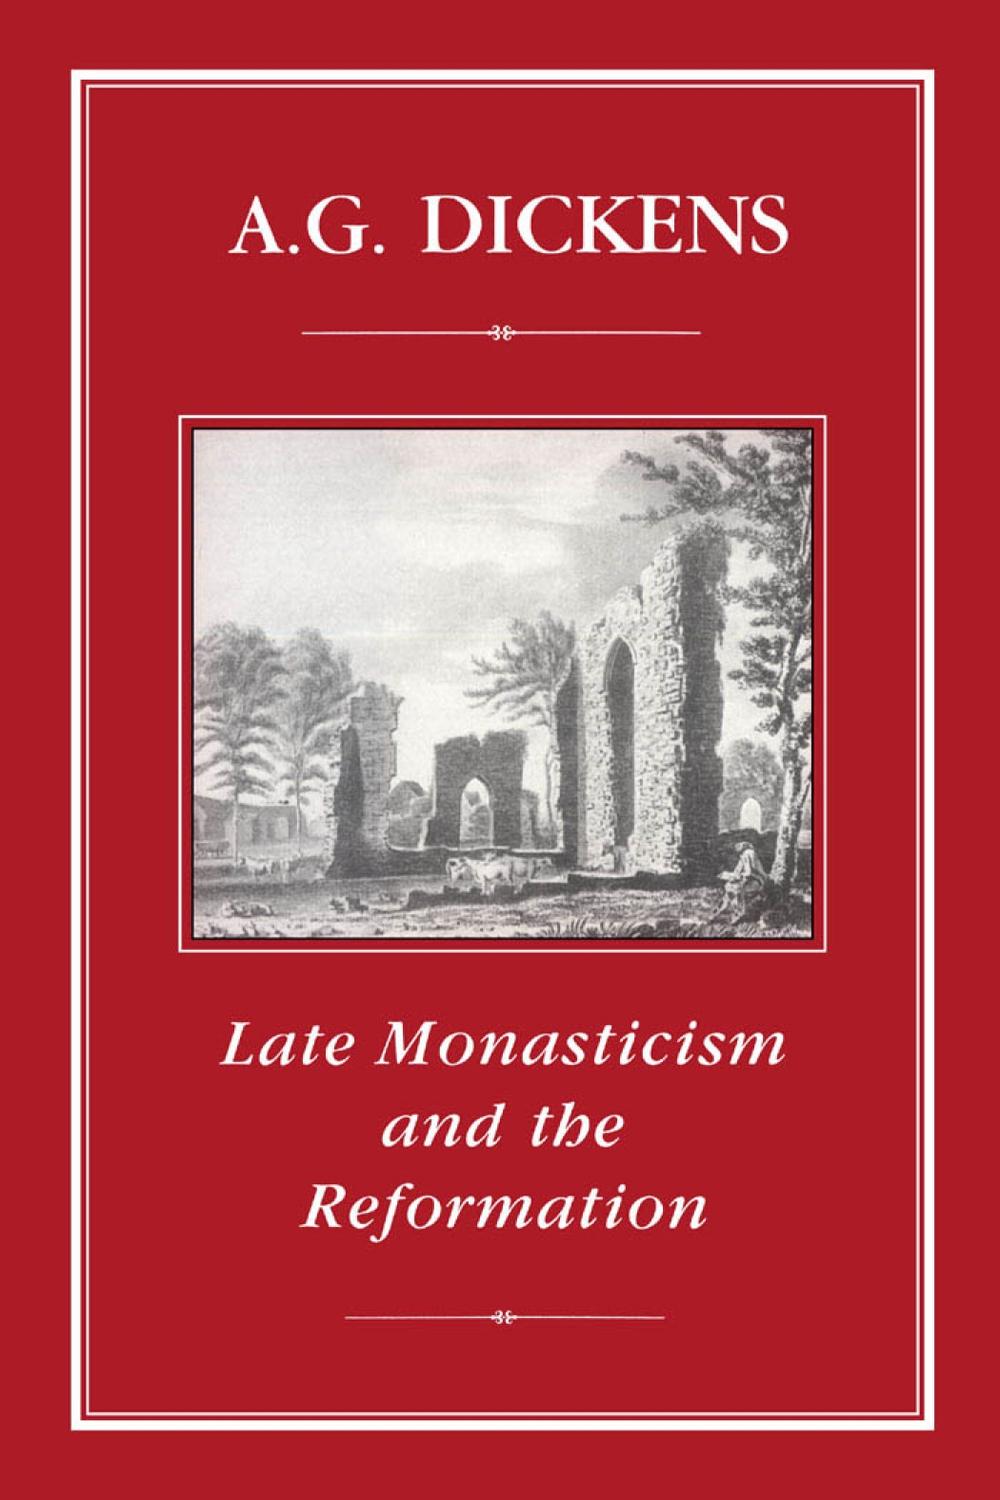 Late Monasticism and Reformation - A. G. Dickens